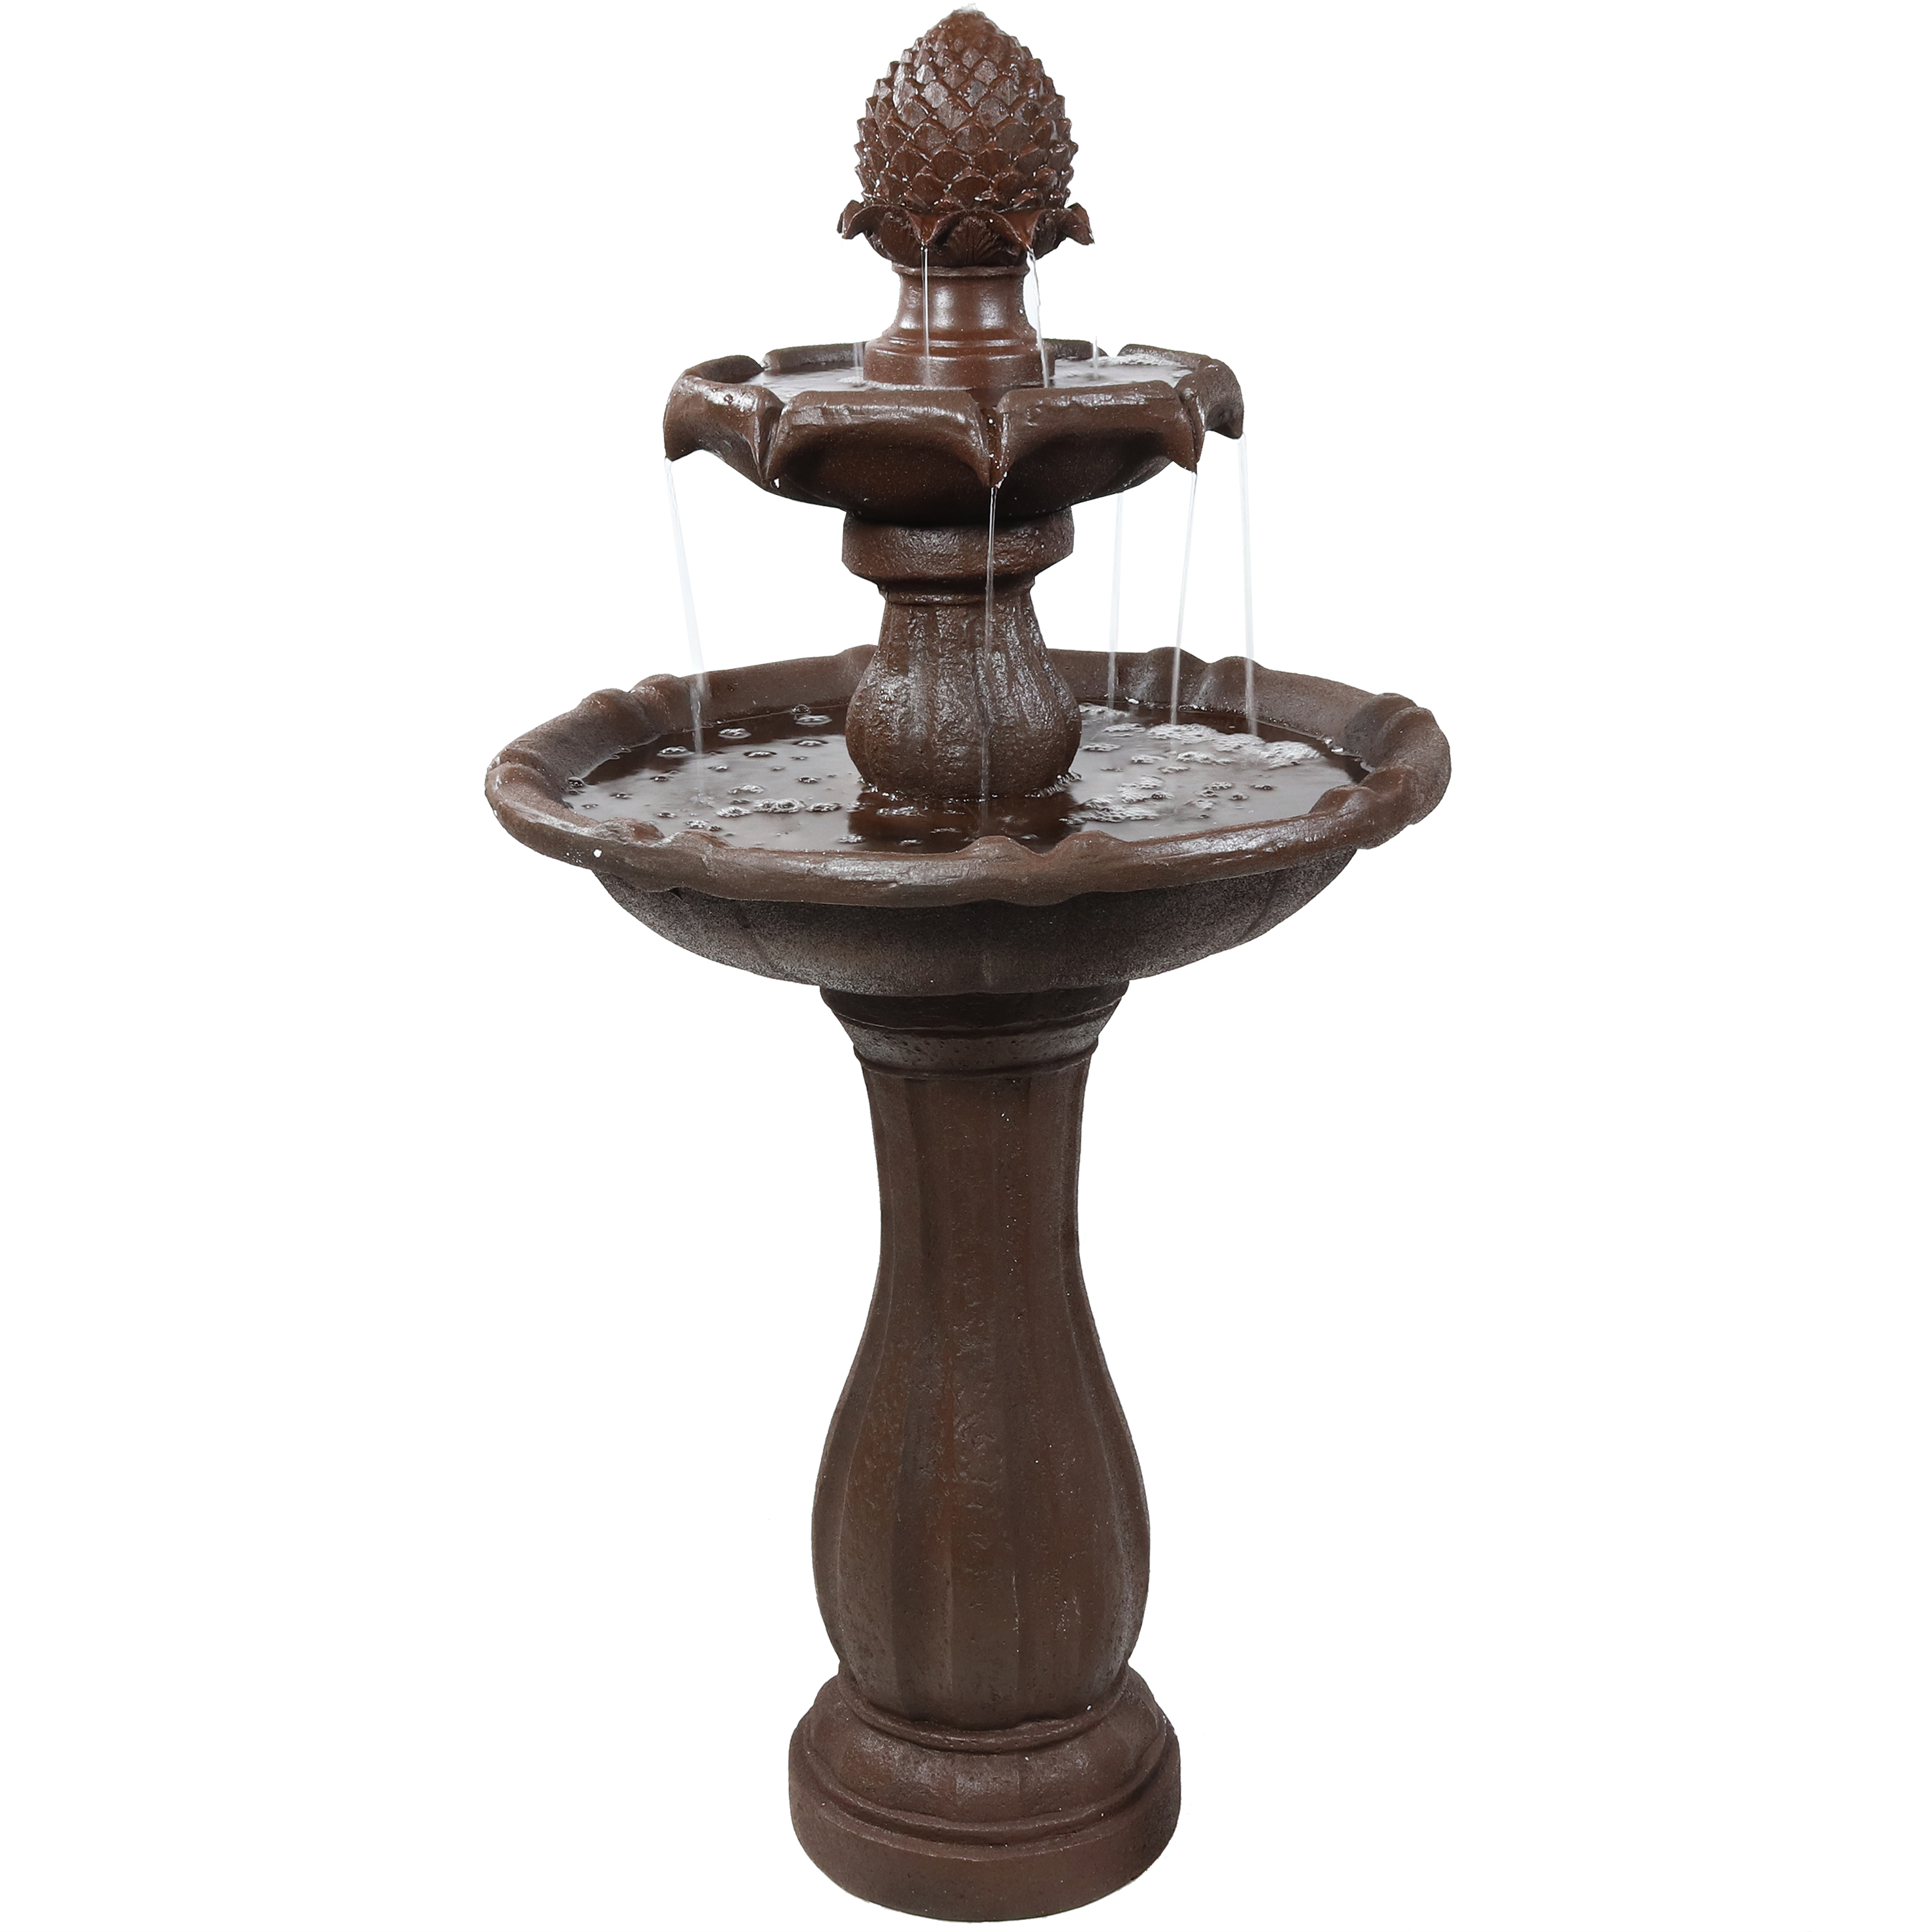 Sunnydaze 2-Tier Pineapple Solar Fountain with Battery Backup, Rust Finish, 46 Inch Tall, No